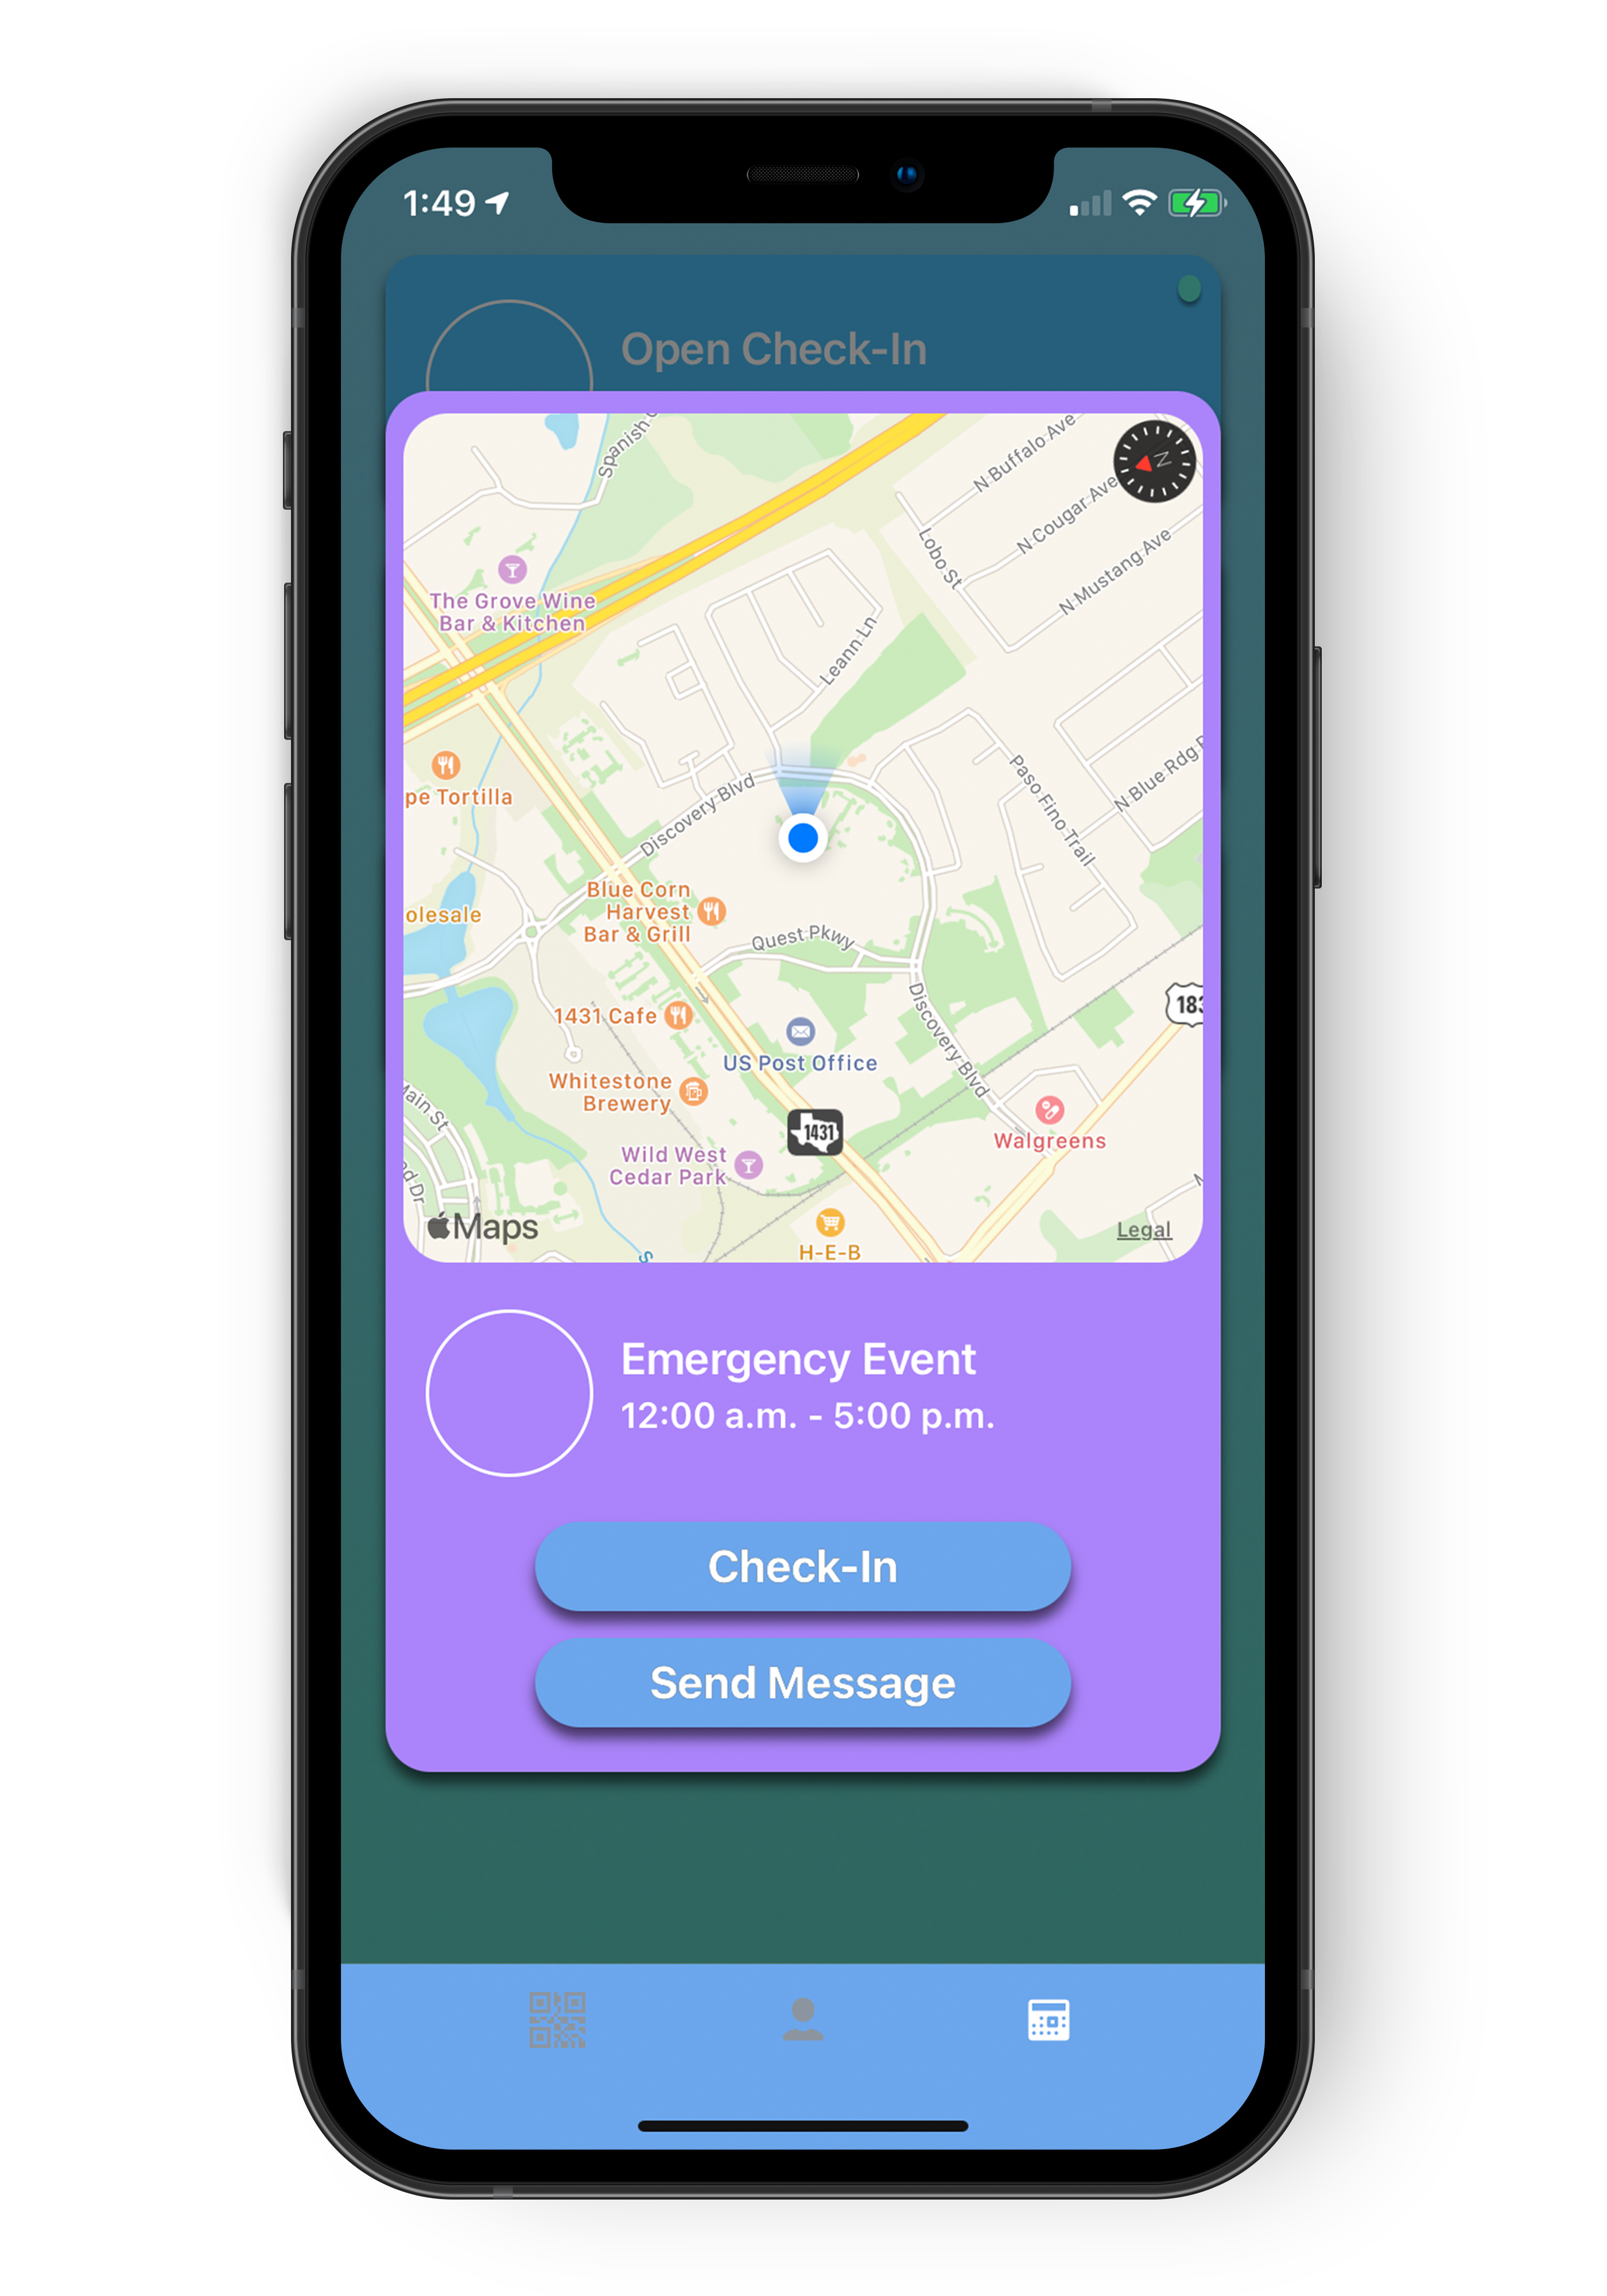 Cloud-in-Hand - Remote Check-in iPhone GeoFence